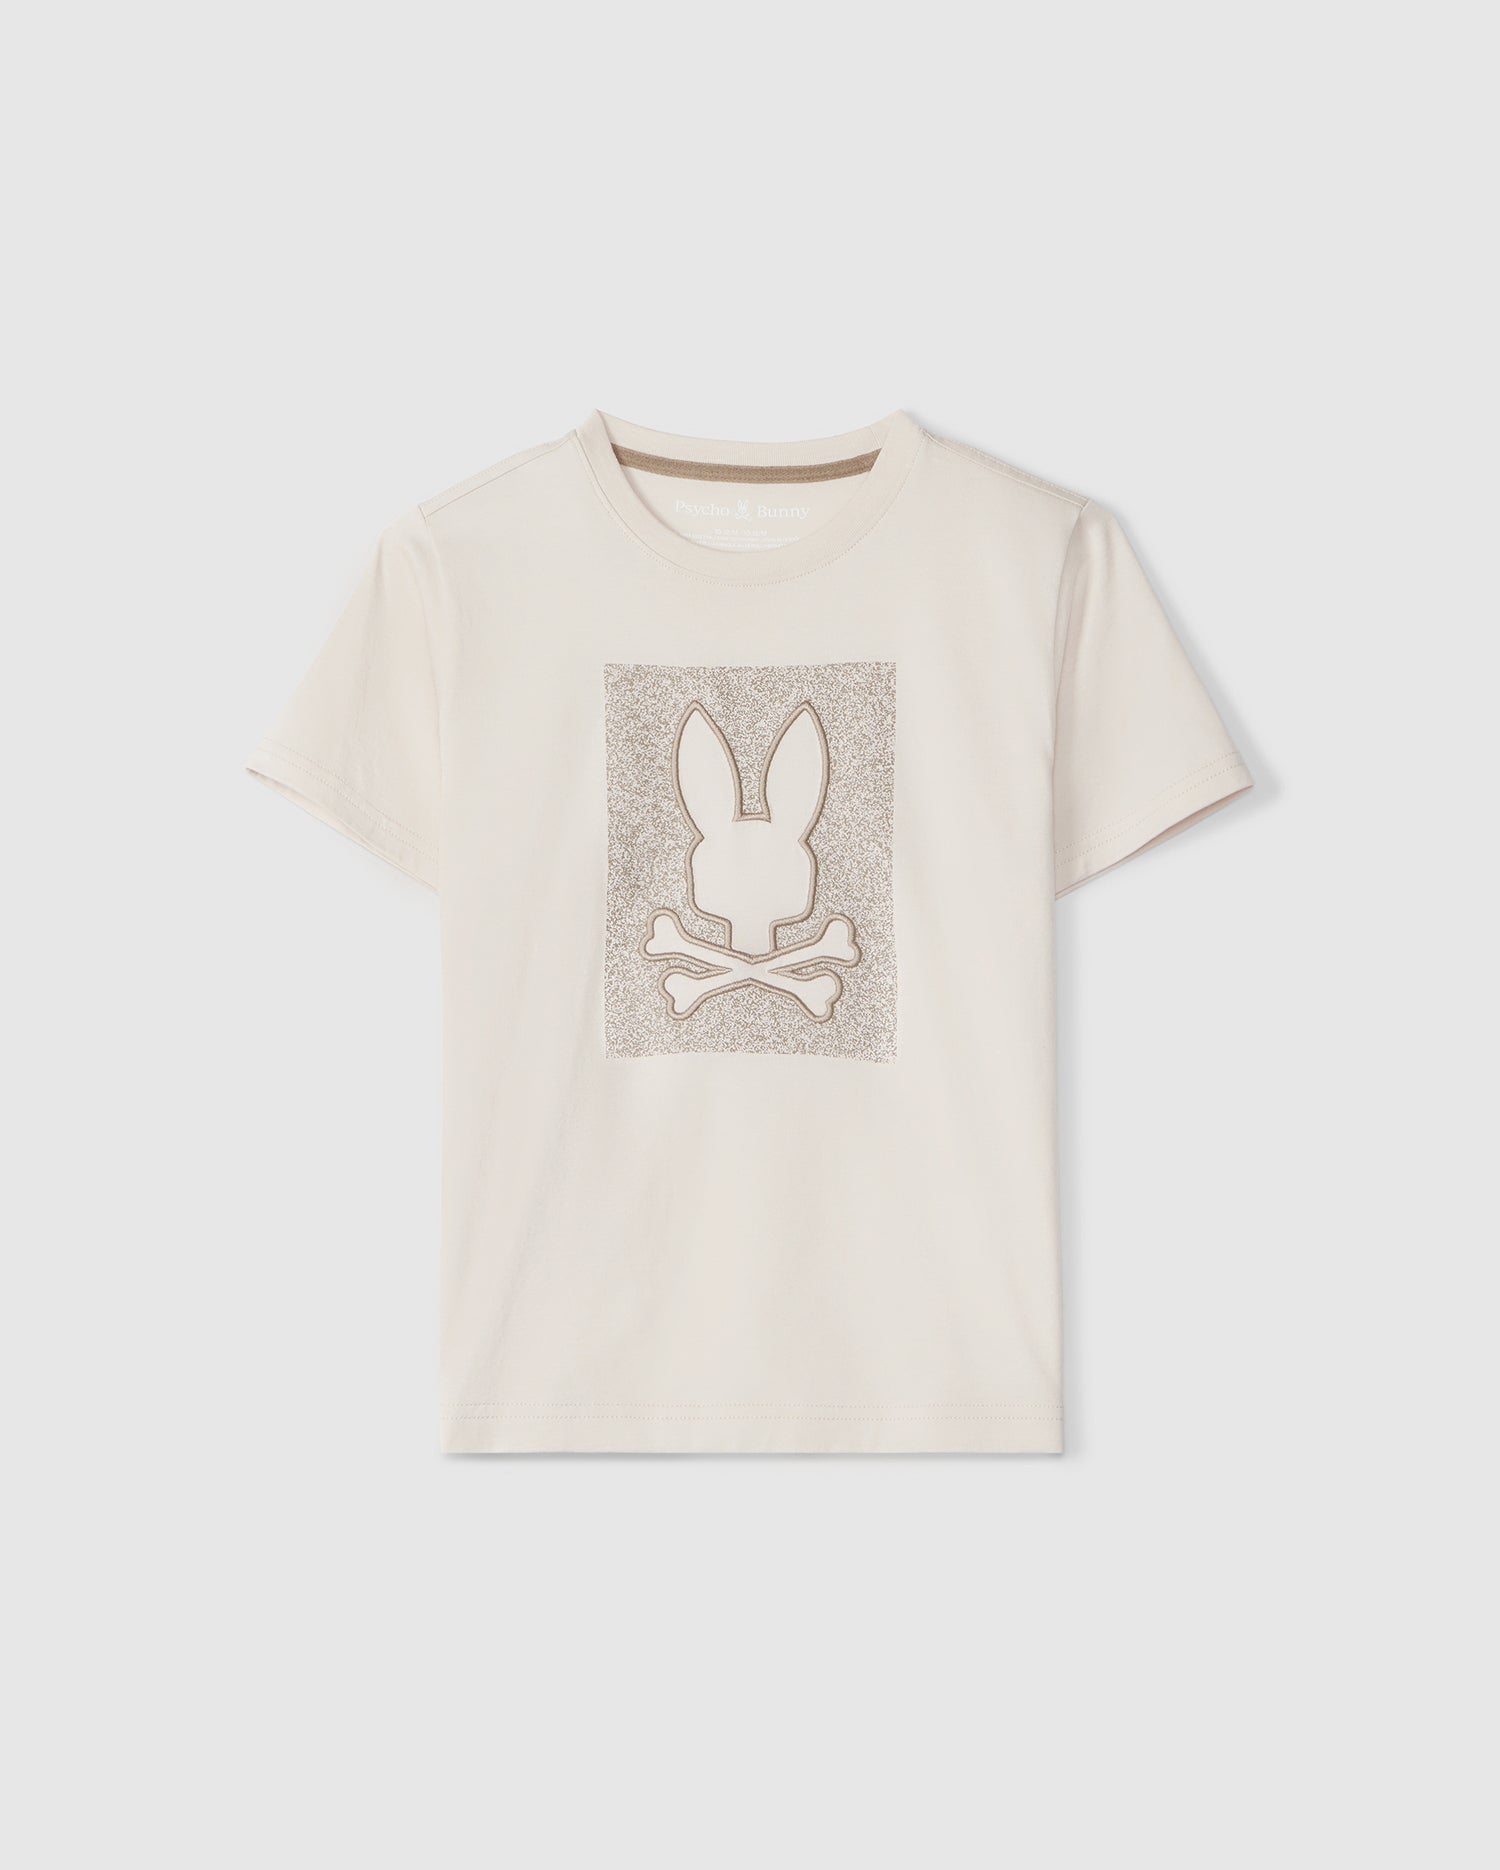 A plain, light-colored Psycho Bunny Livingston graphic tee featuring an embroidered Bunny design of a stylized rabbit head above crossed bones within a square frame, set against a plain background.